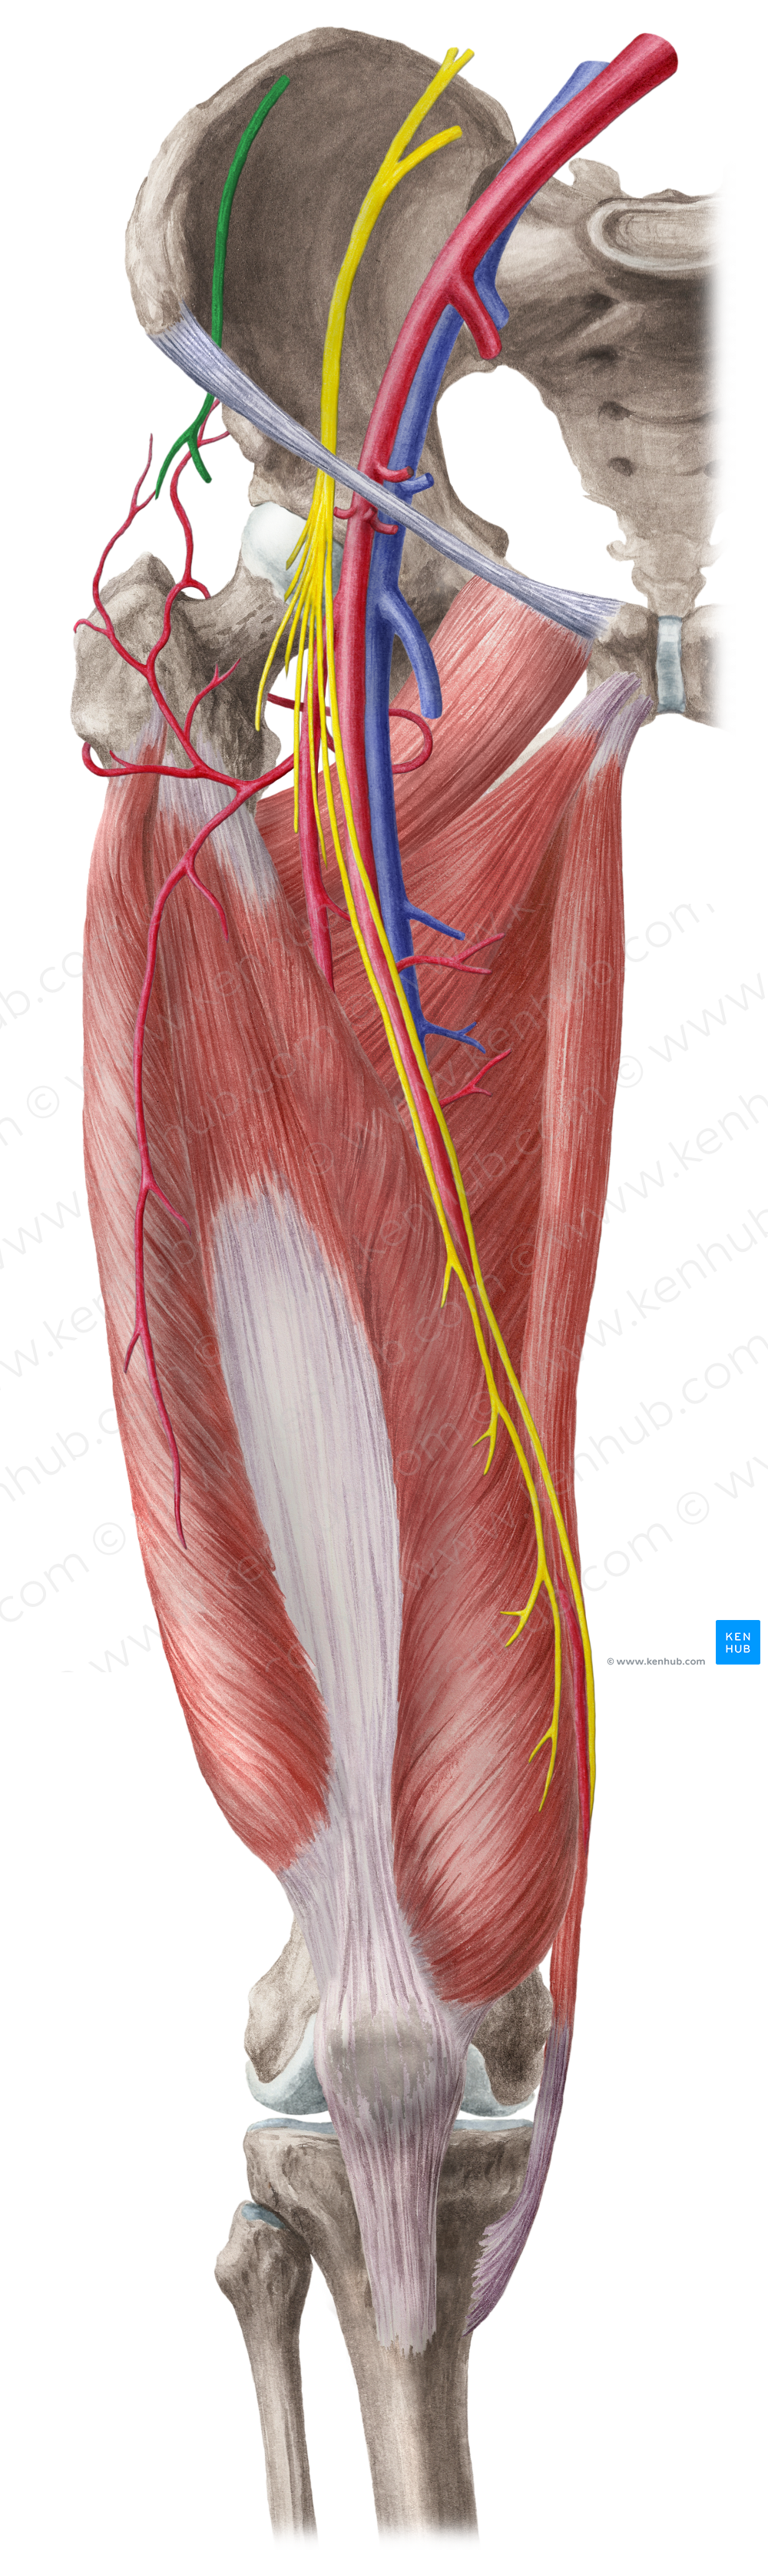 Lateral femoral cutaneous nerve (#6378)